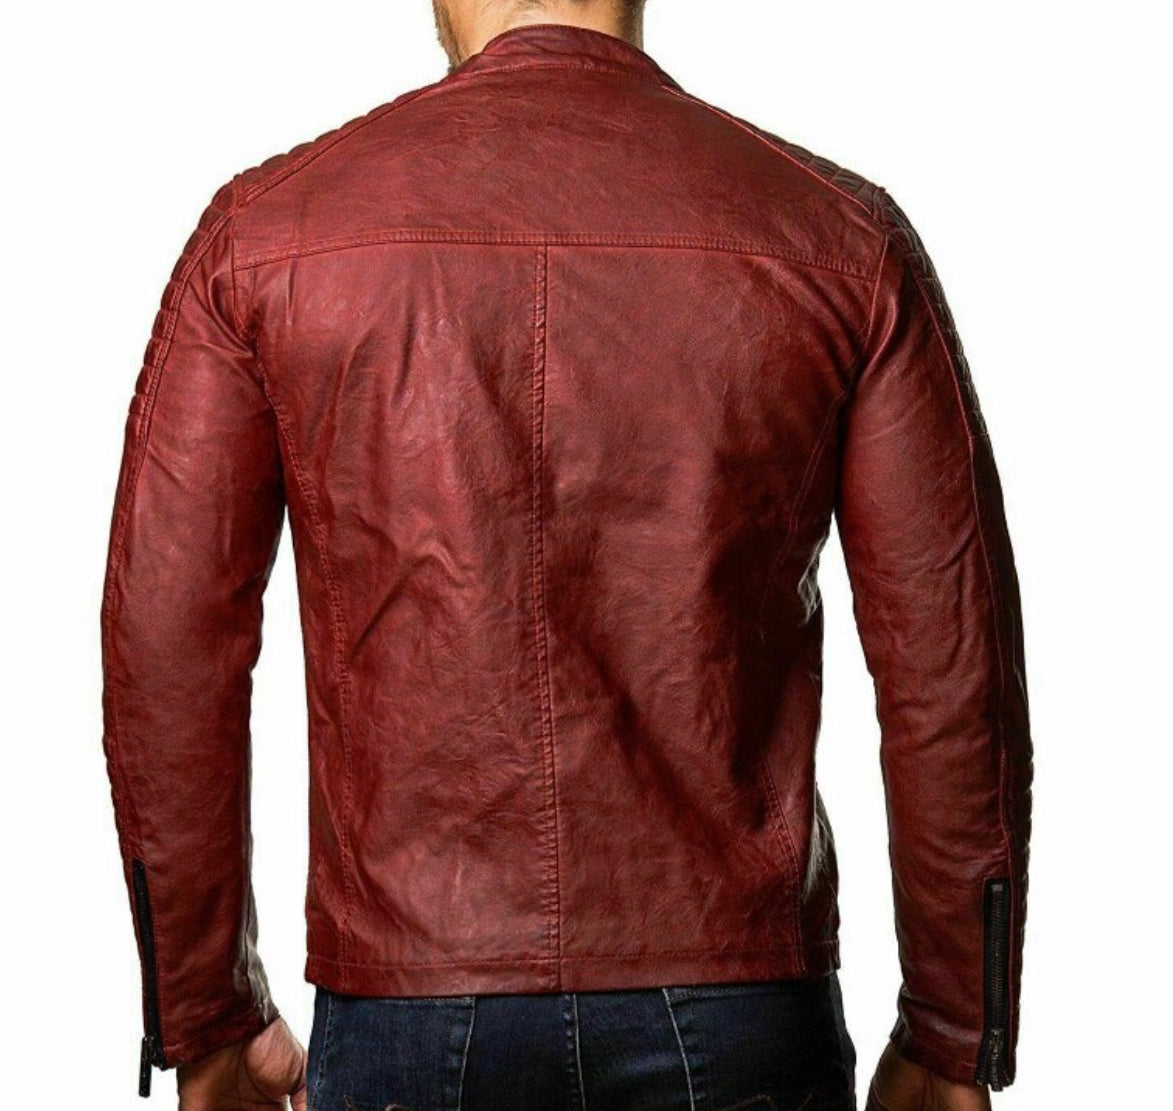 Toxyno Faux Leather Jacket